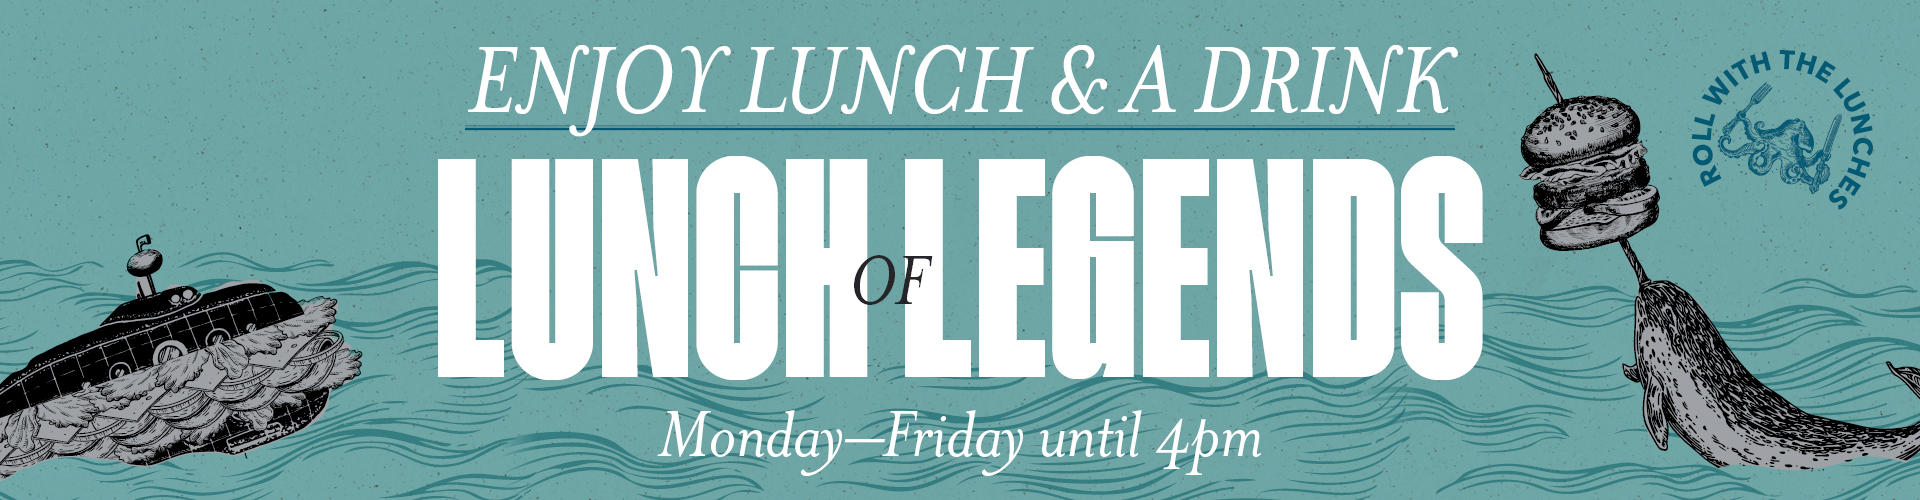 Lunch and a drink offers in Sheffield | The Graduate